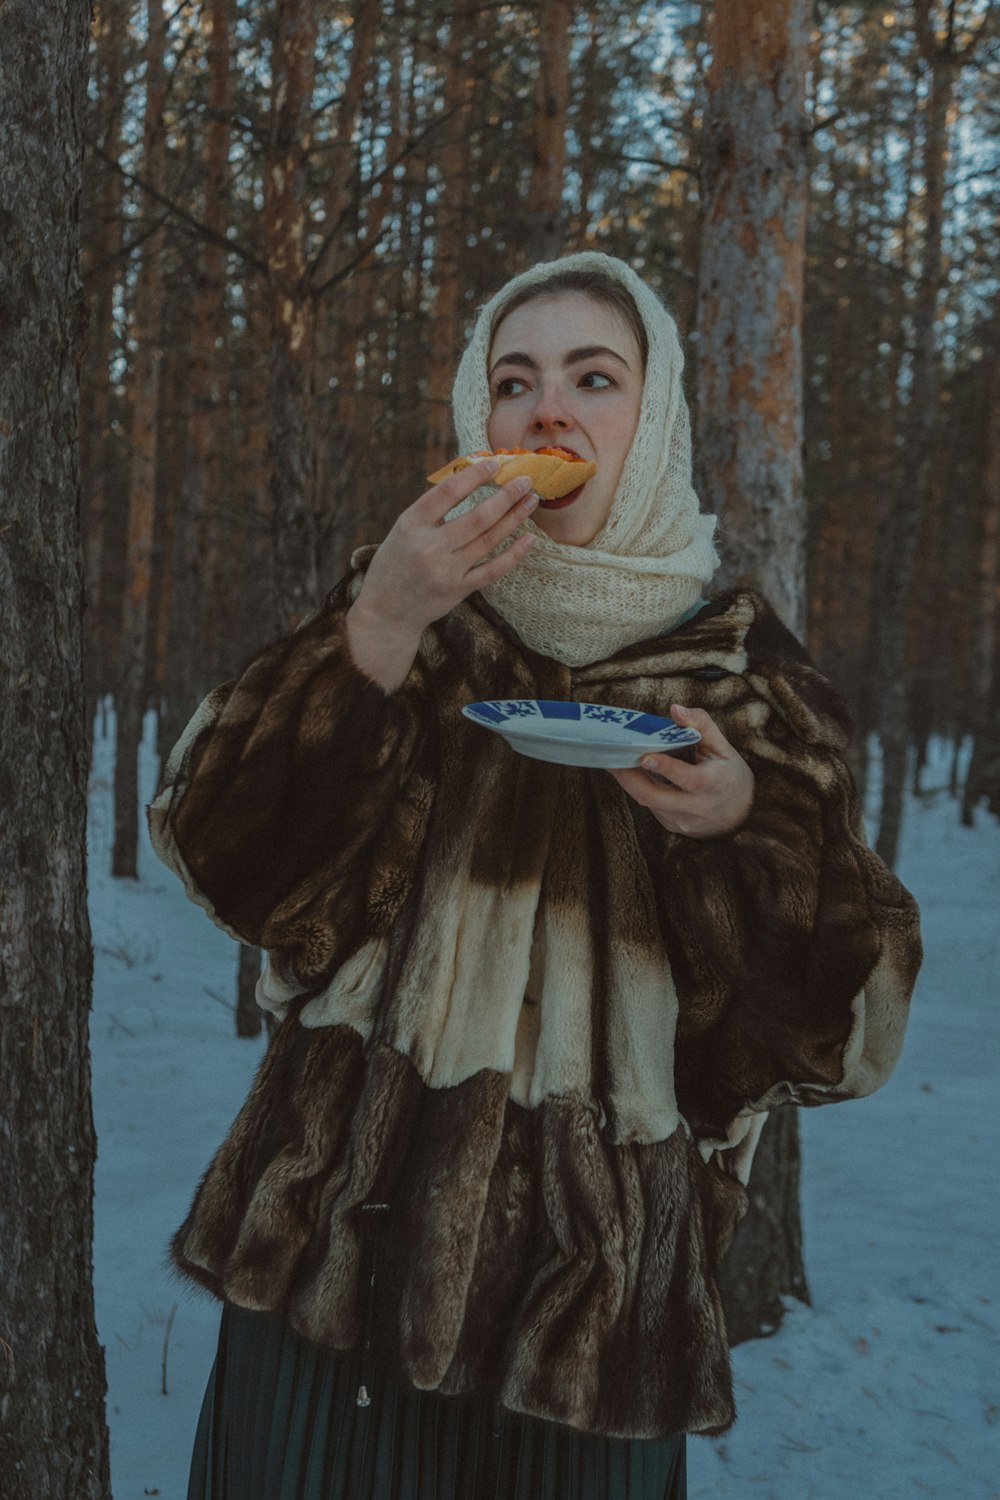 a woman in a fur coat eating a piece of food